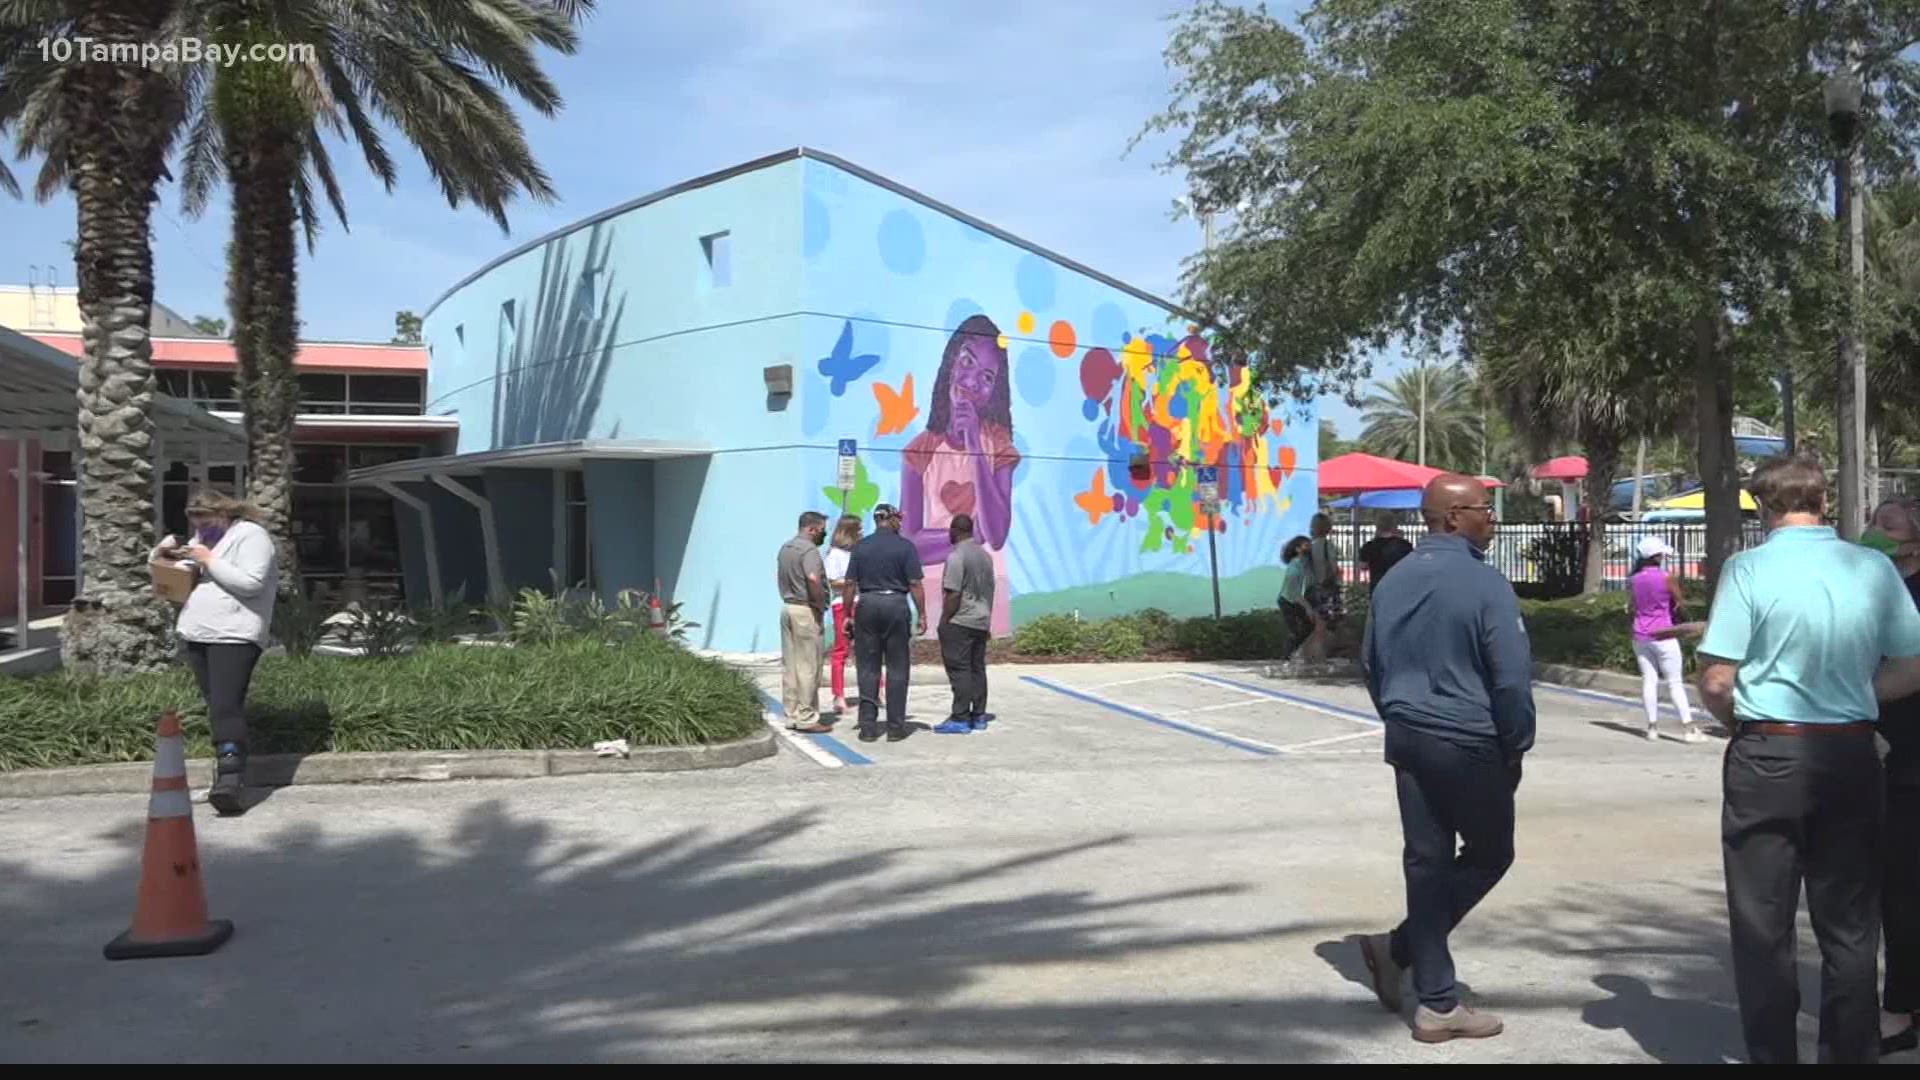 The North Greenwood Rec Center has a fresh coat of uplifting paint thanks to a mural contest by Valspar and the local PGA Tour stop.